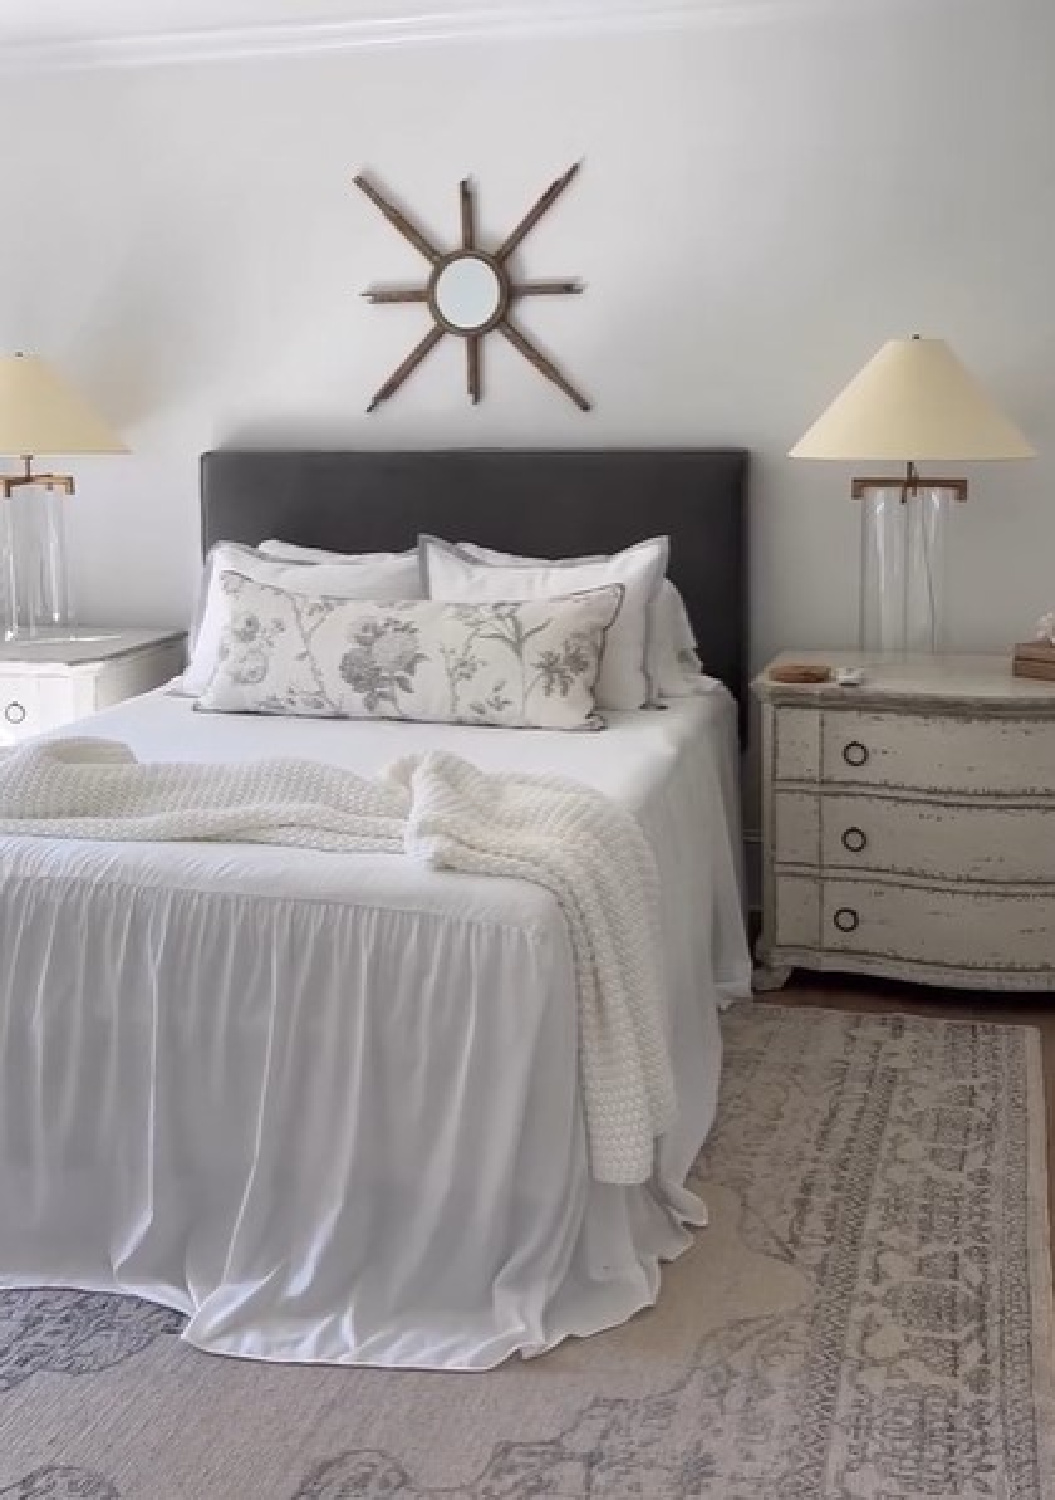 Sherry Hart designed romantic white bedroom with ruffled coverlet, velvet headboard, VC lamps, and muted area rug.